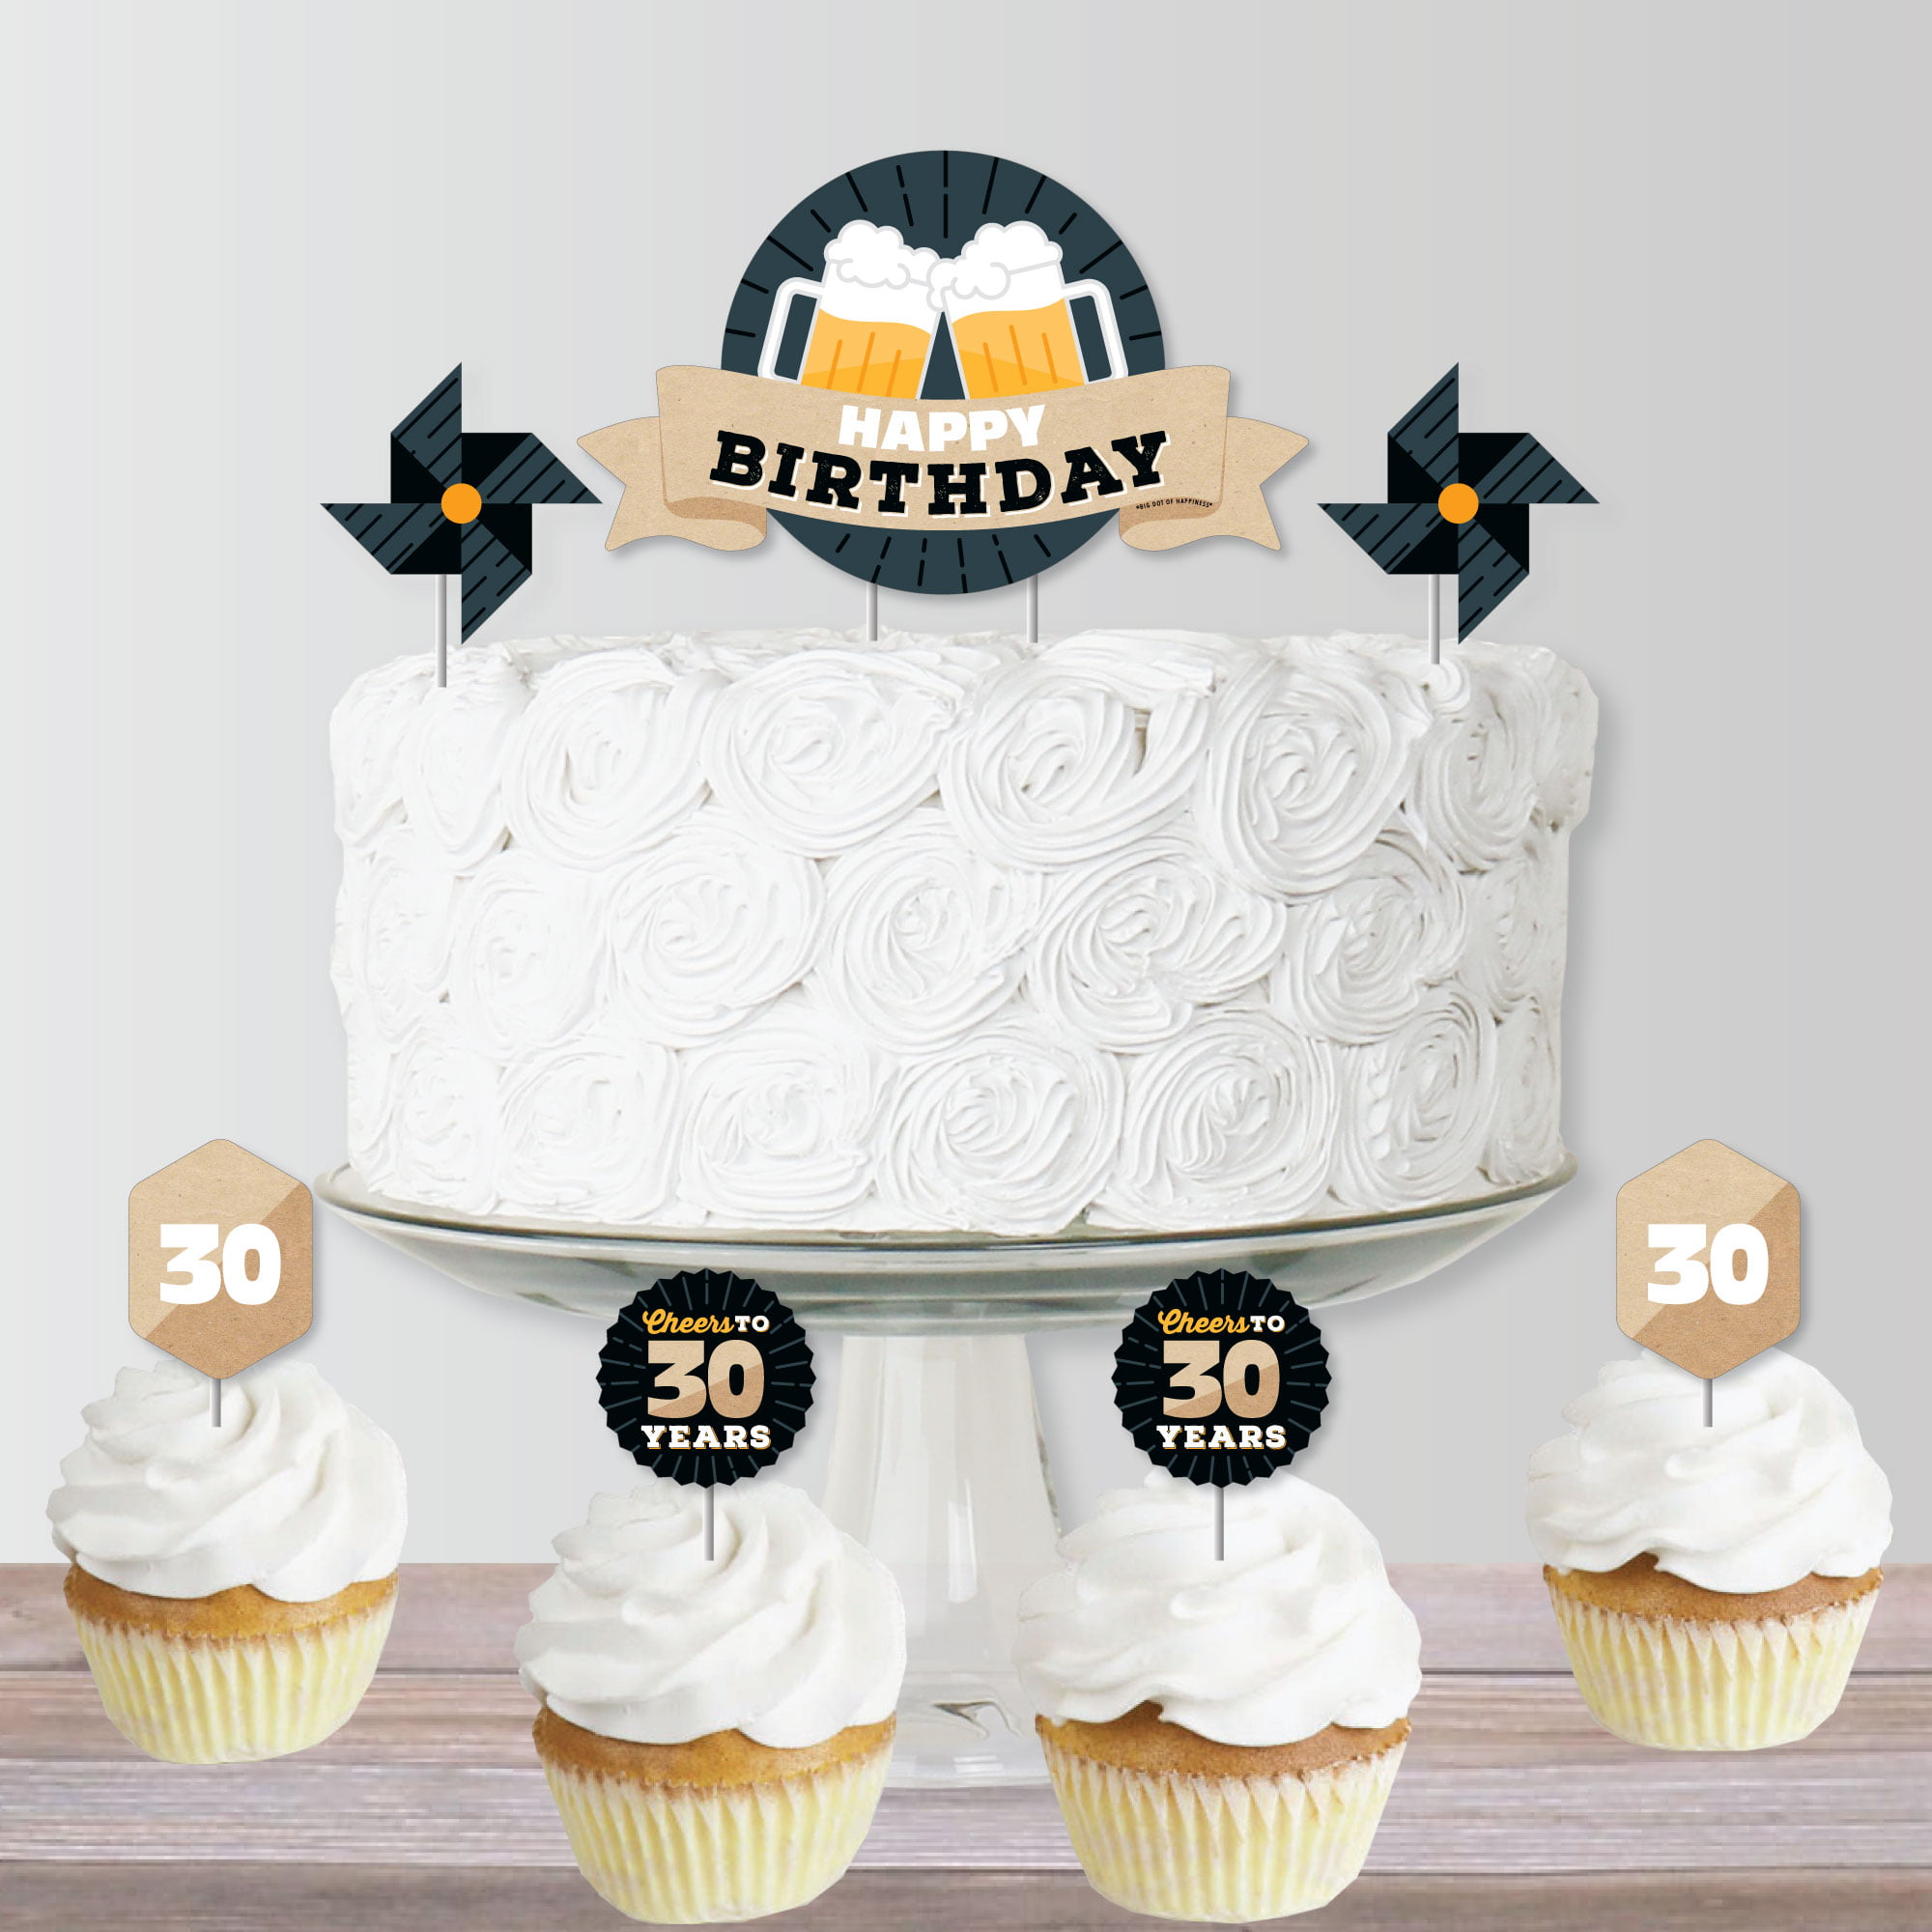 30 years anniversary with gift and cake Royalty Free Vector